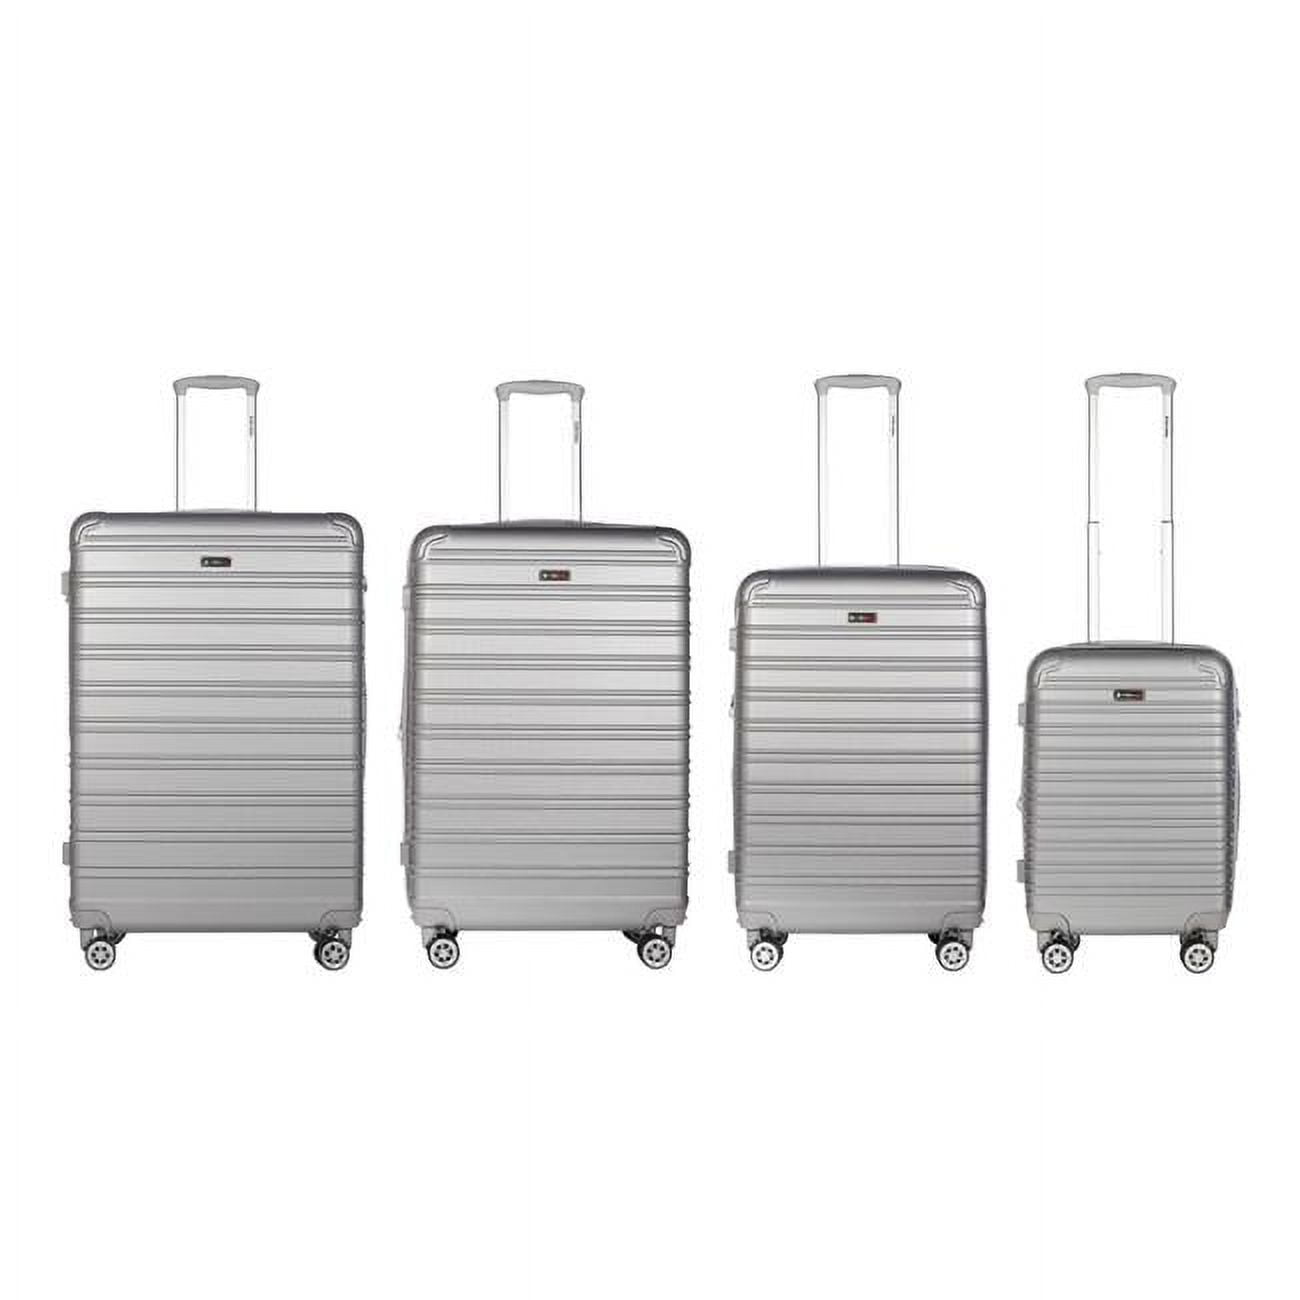 Picture of America&apos;s Travel Merchandise KING-GRAY-0563 King Collection 4pc Silver luggage Set(20/26/28/30&apos;)